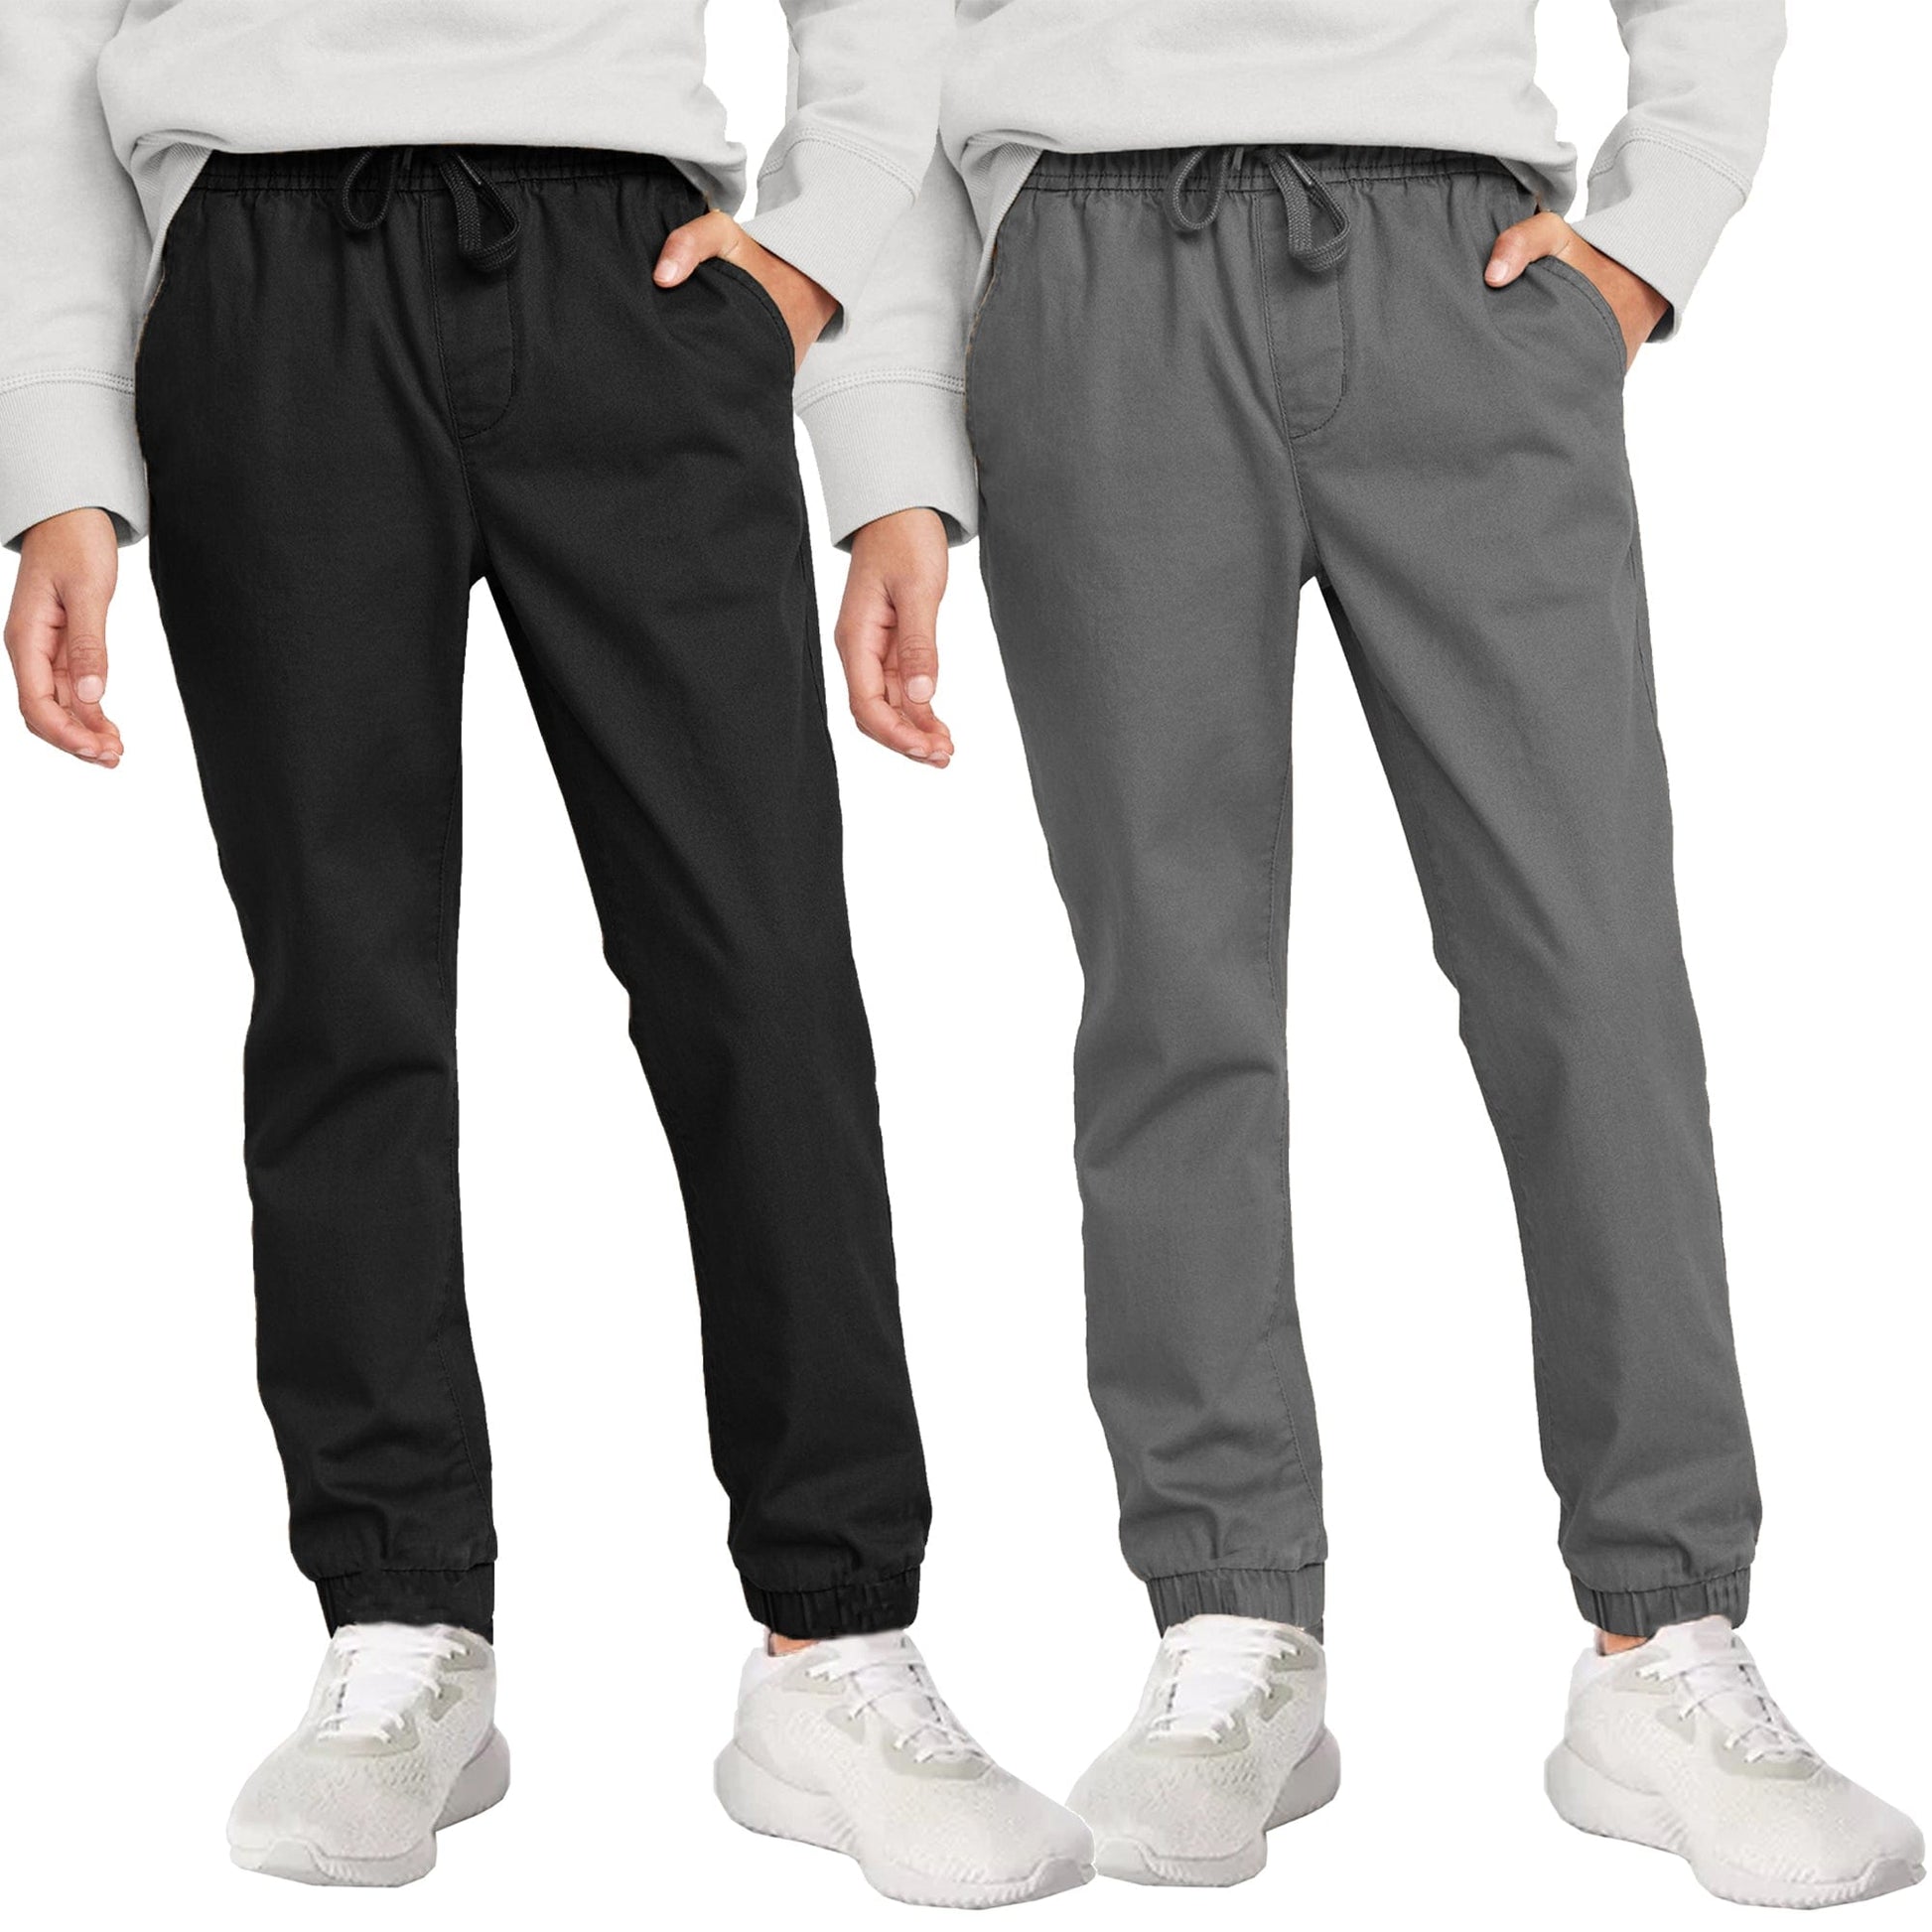 2-Pack Boy's Slim Fitting Cotton Stretch Classic Twill Joggers - GalaxybyHarvic